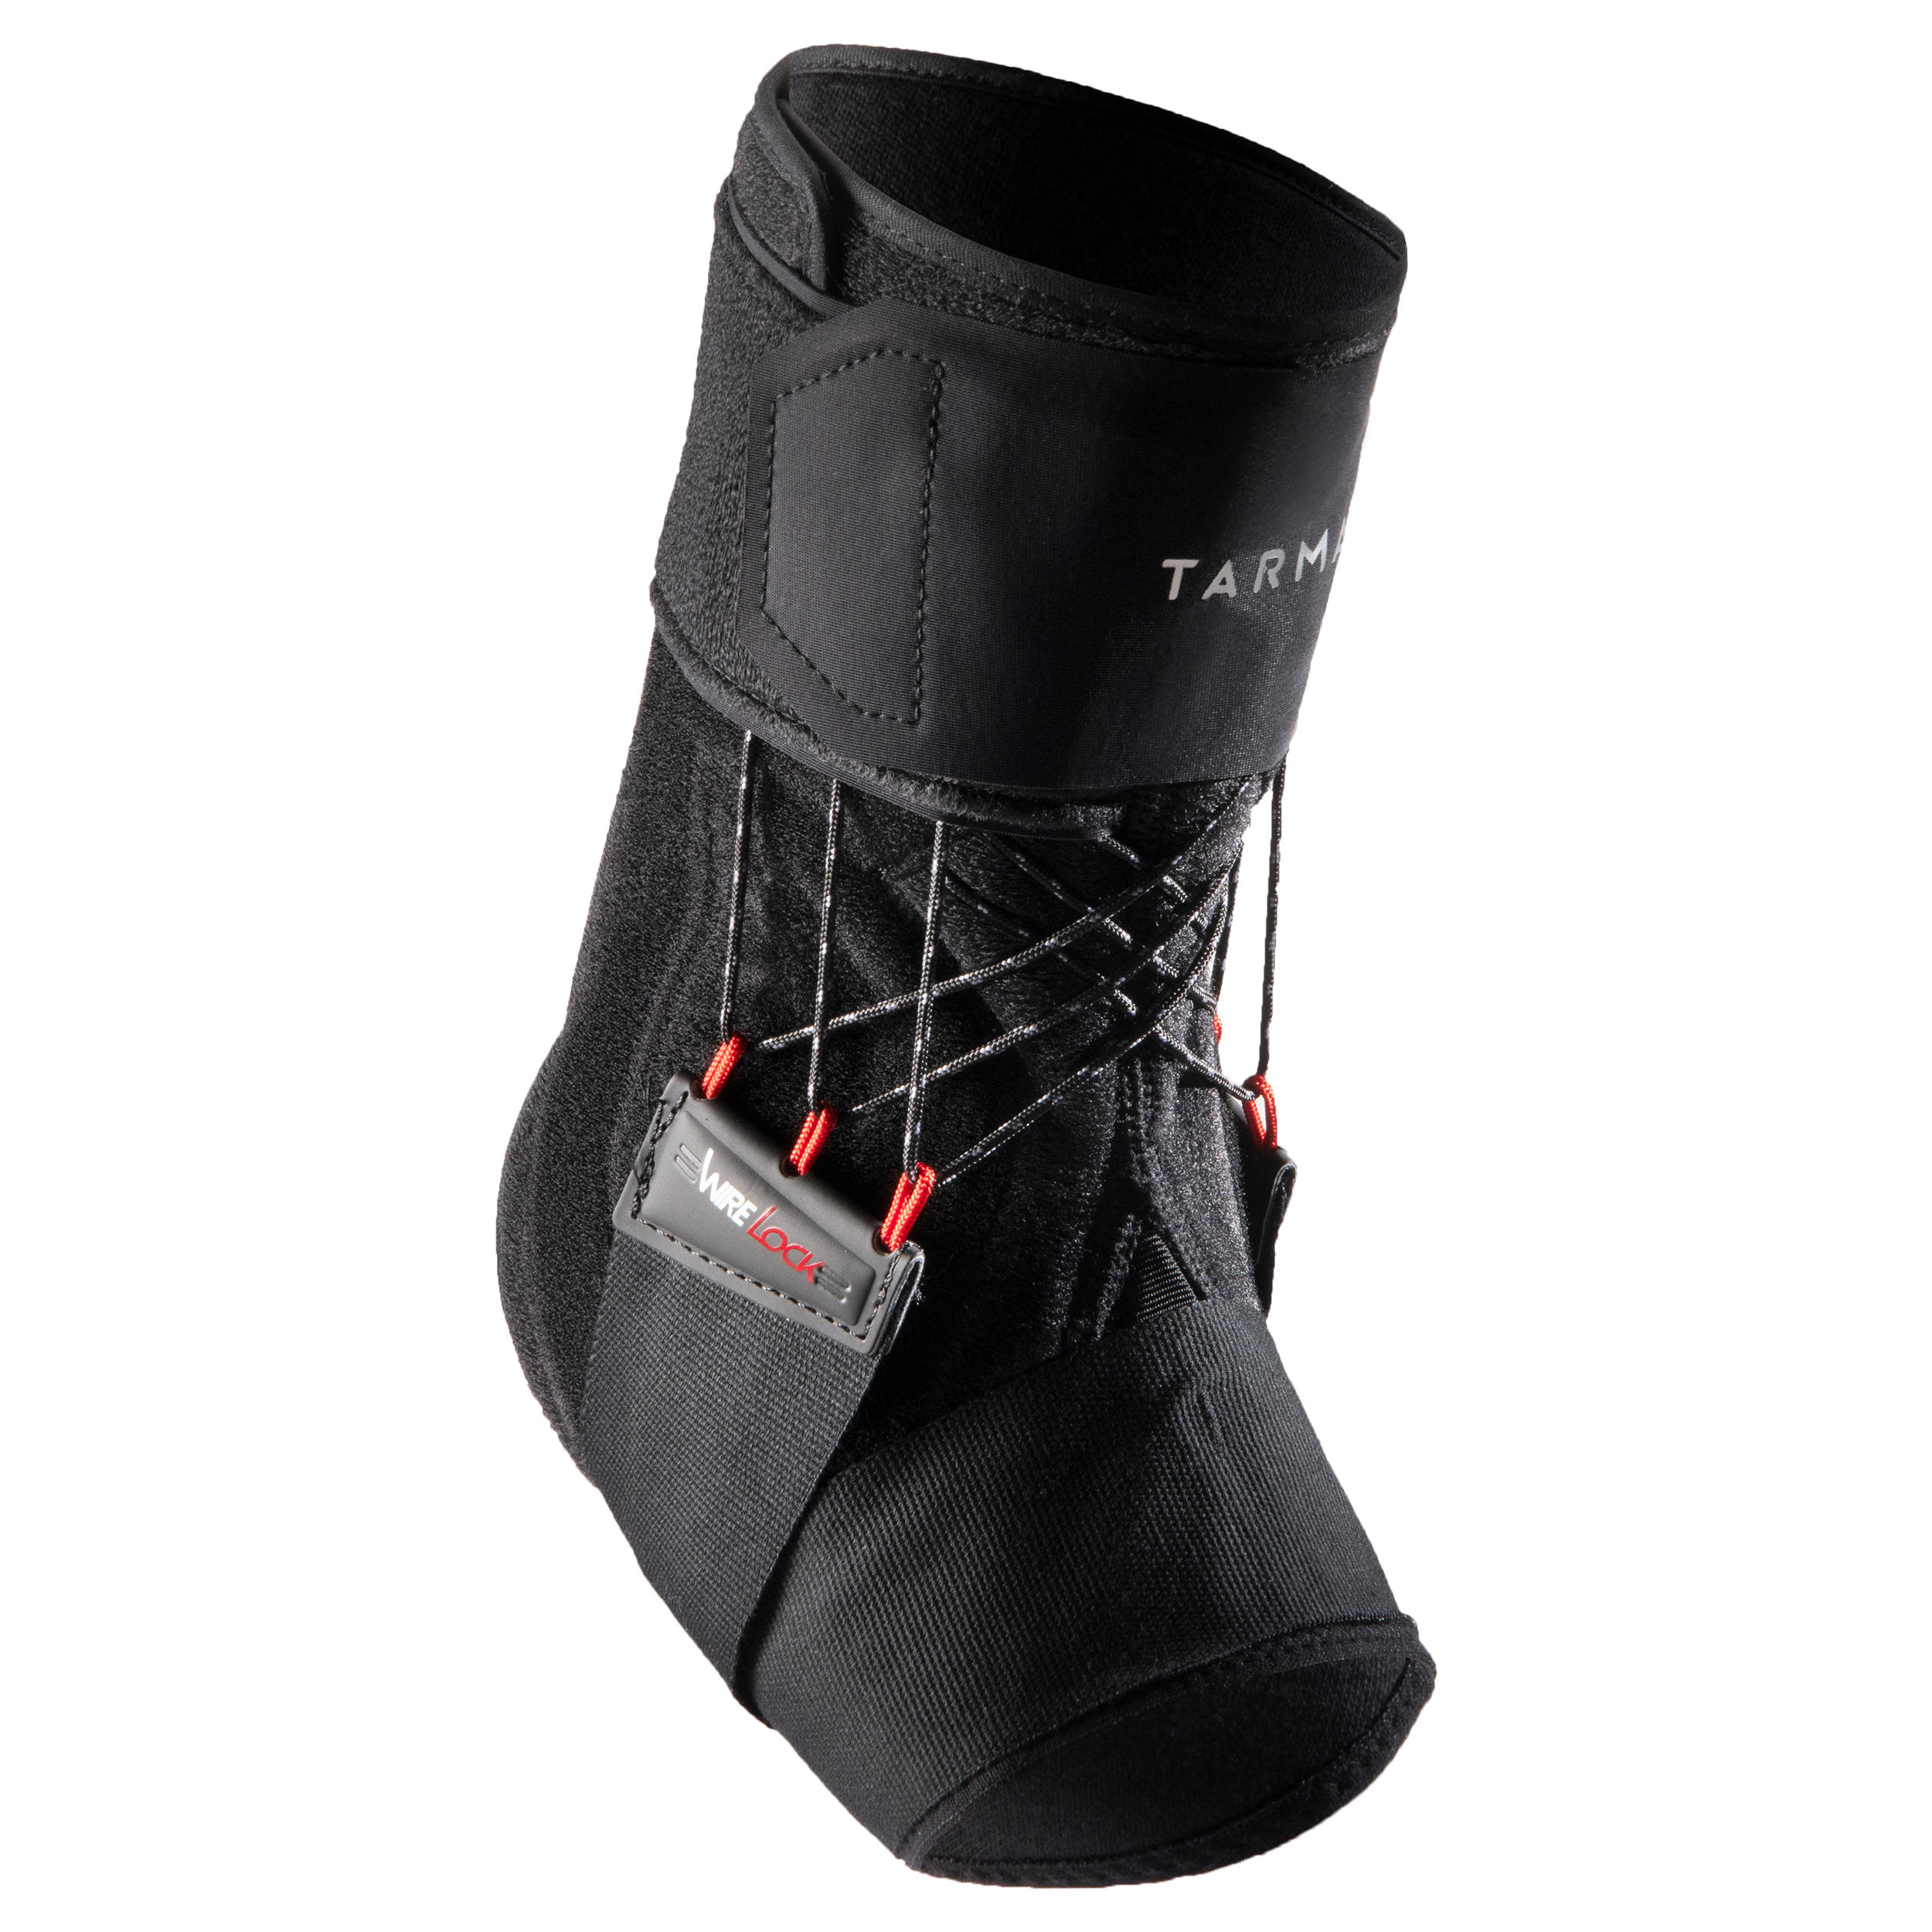 Left Ankle Support Strong 900 TARMAK 